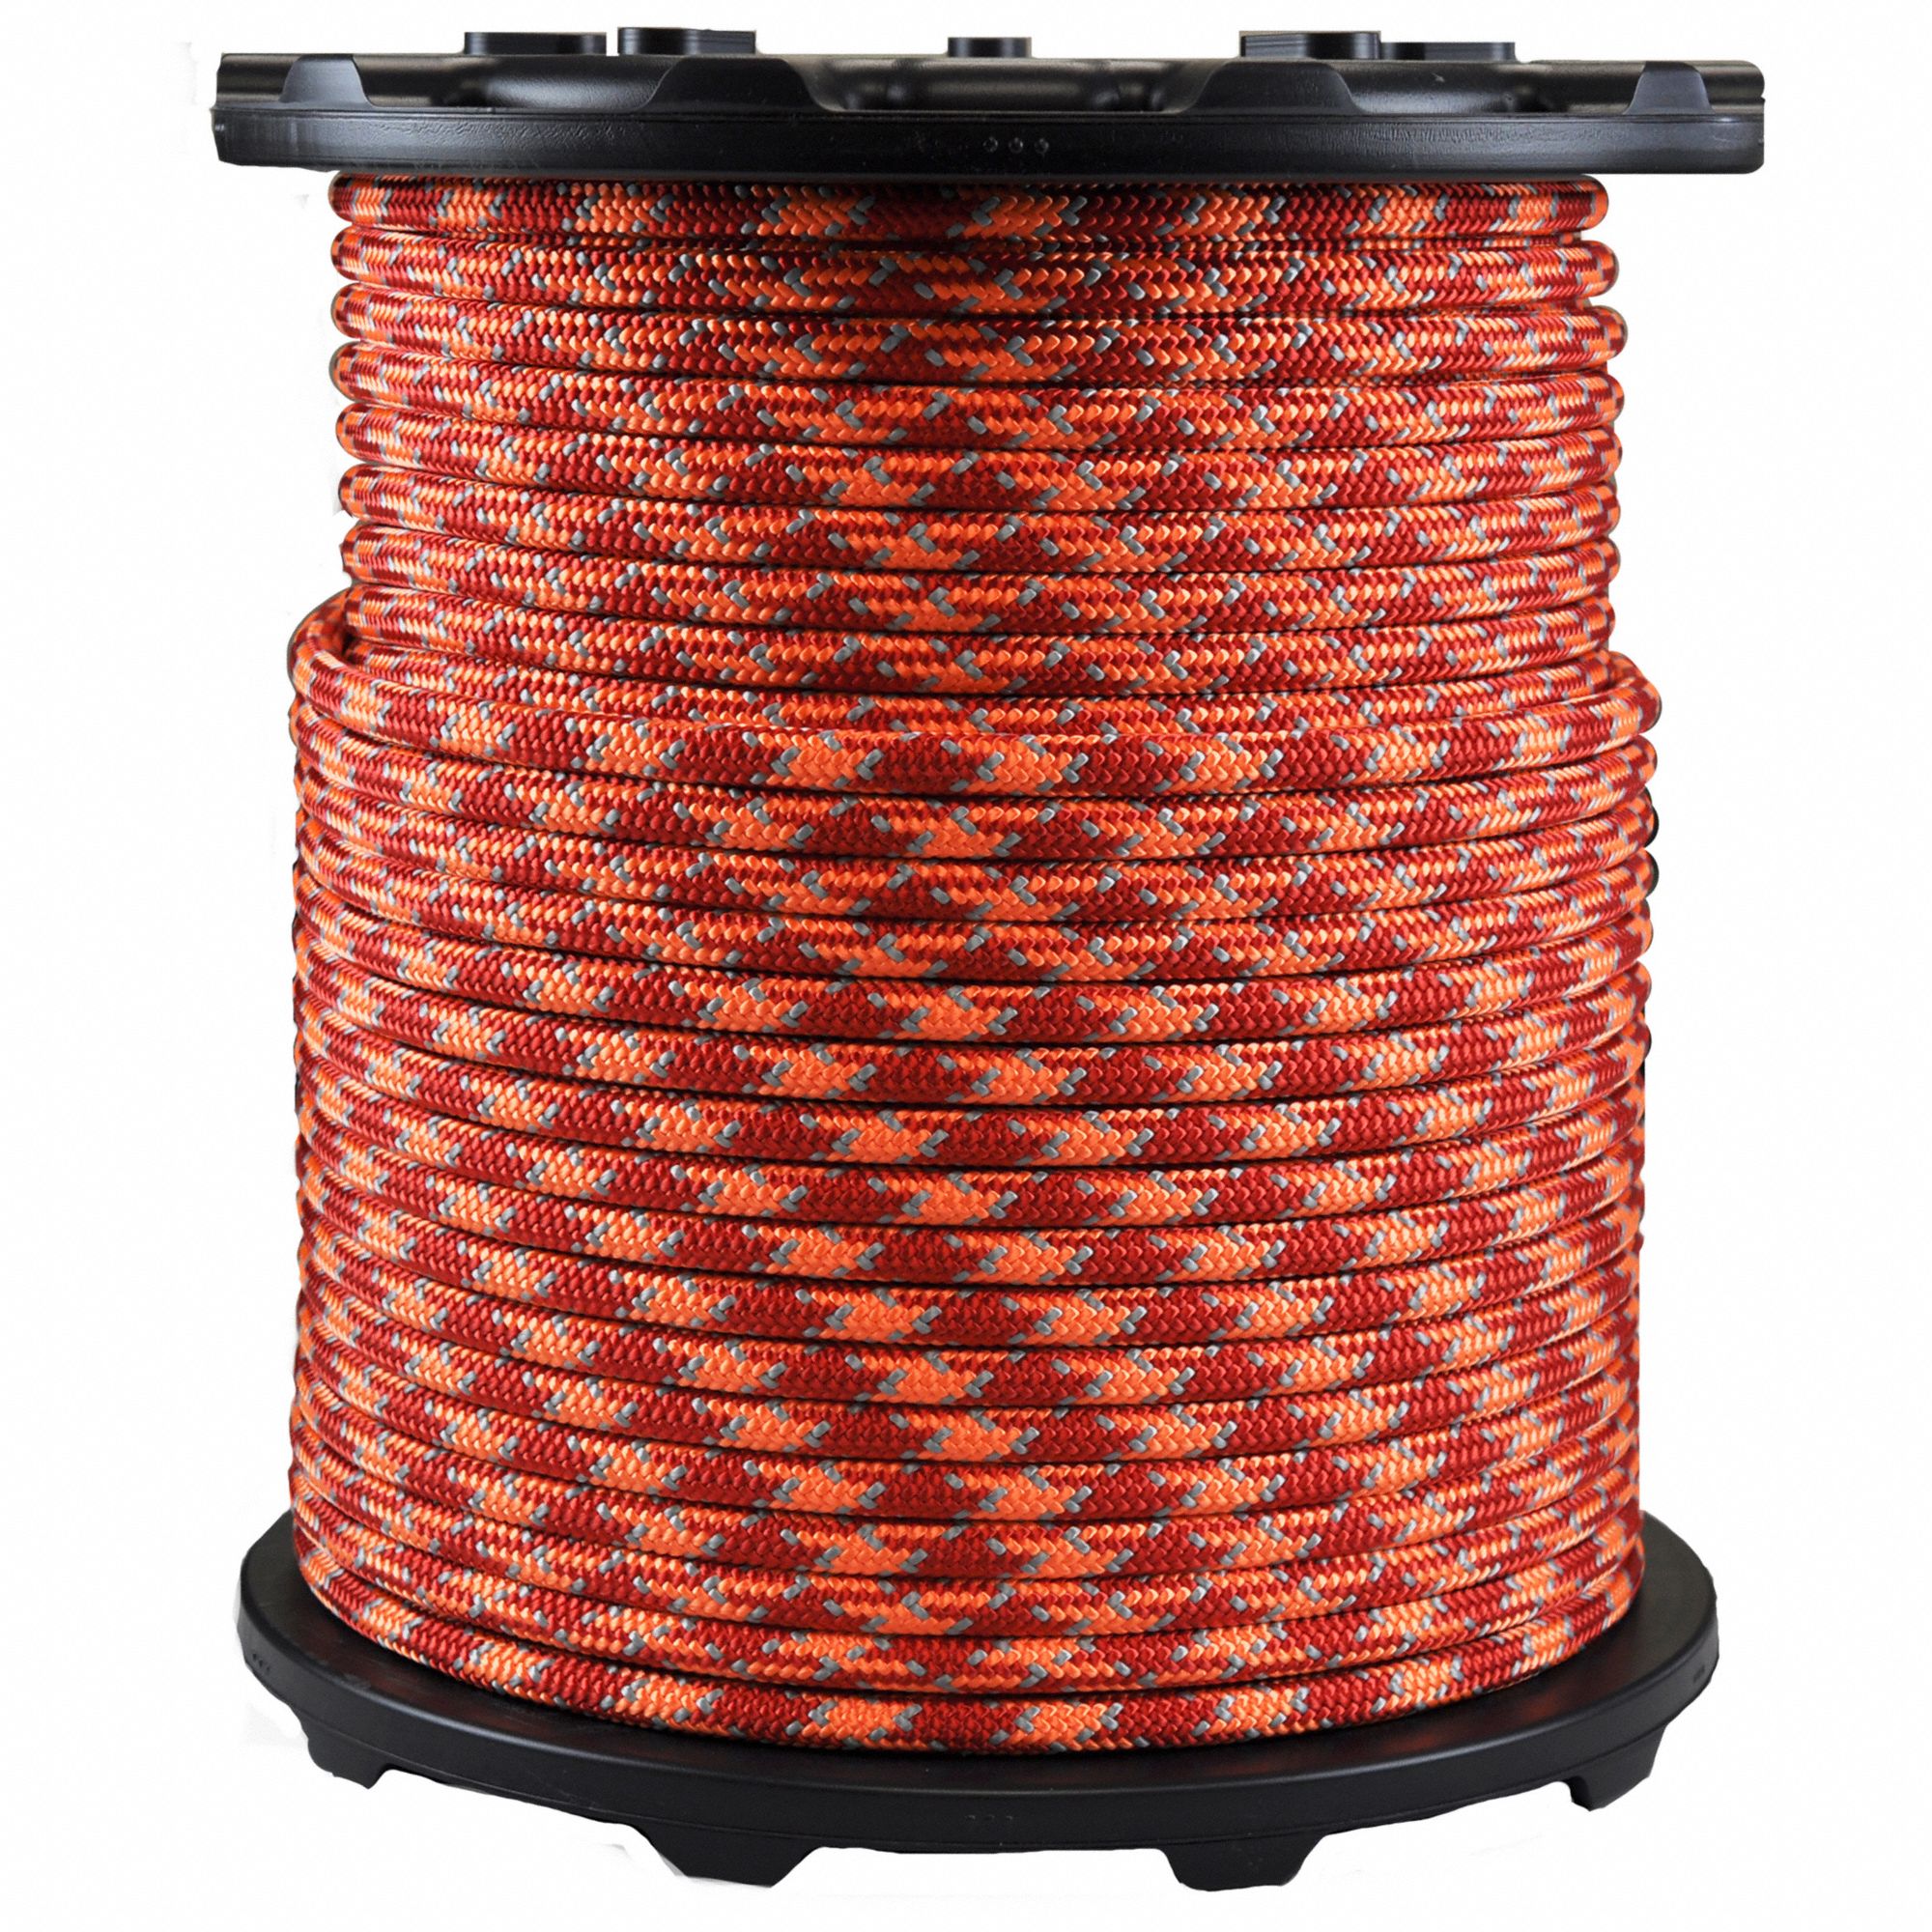 Climbing Rope: 7/16 in Rope Dia, Orange/Red/Silver, 600 ft Rope Lg, 603 lb Working Load Limit